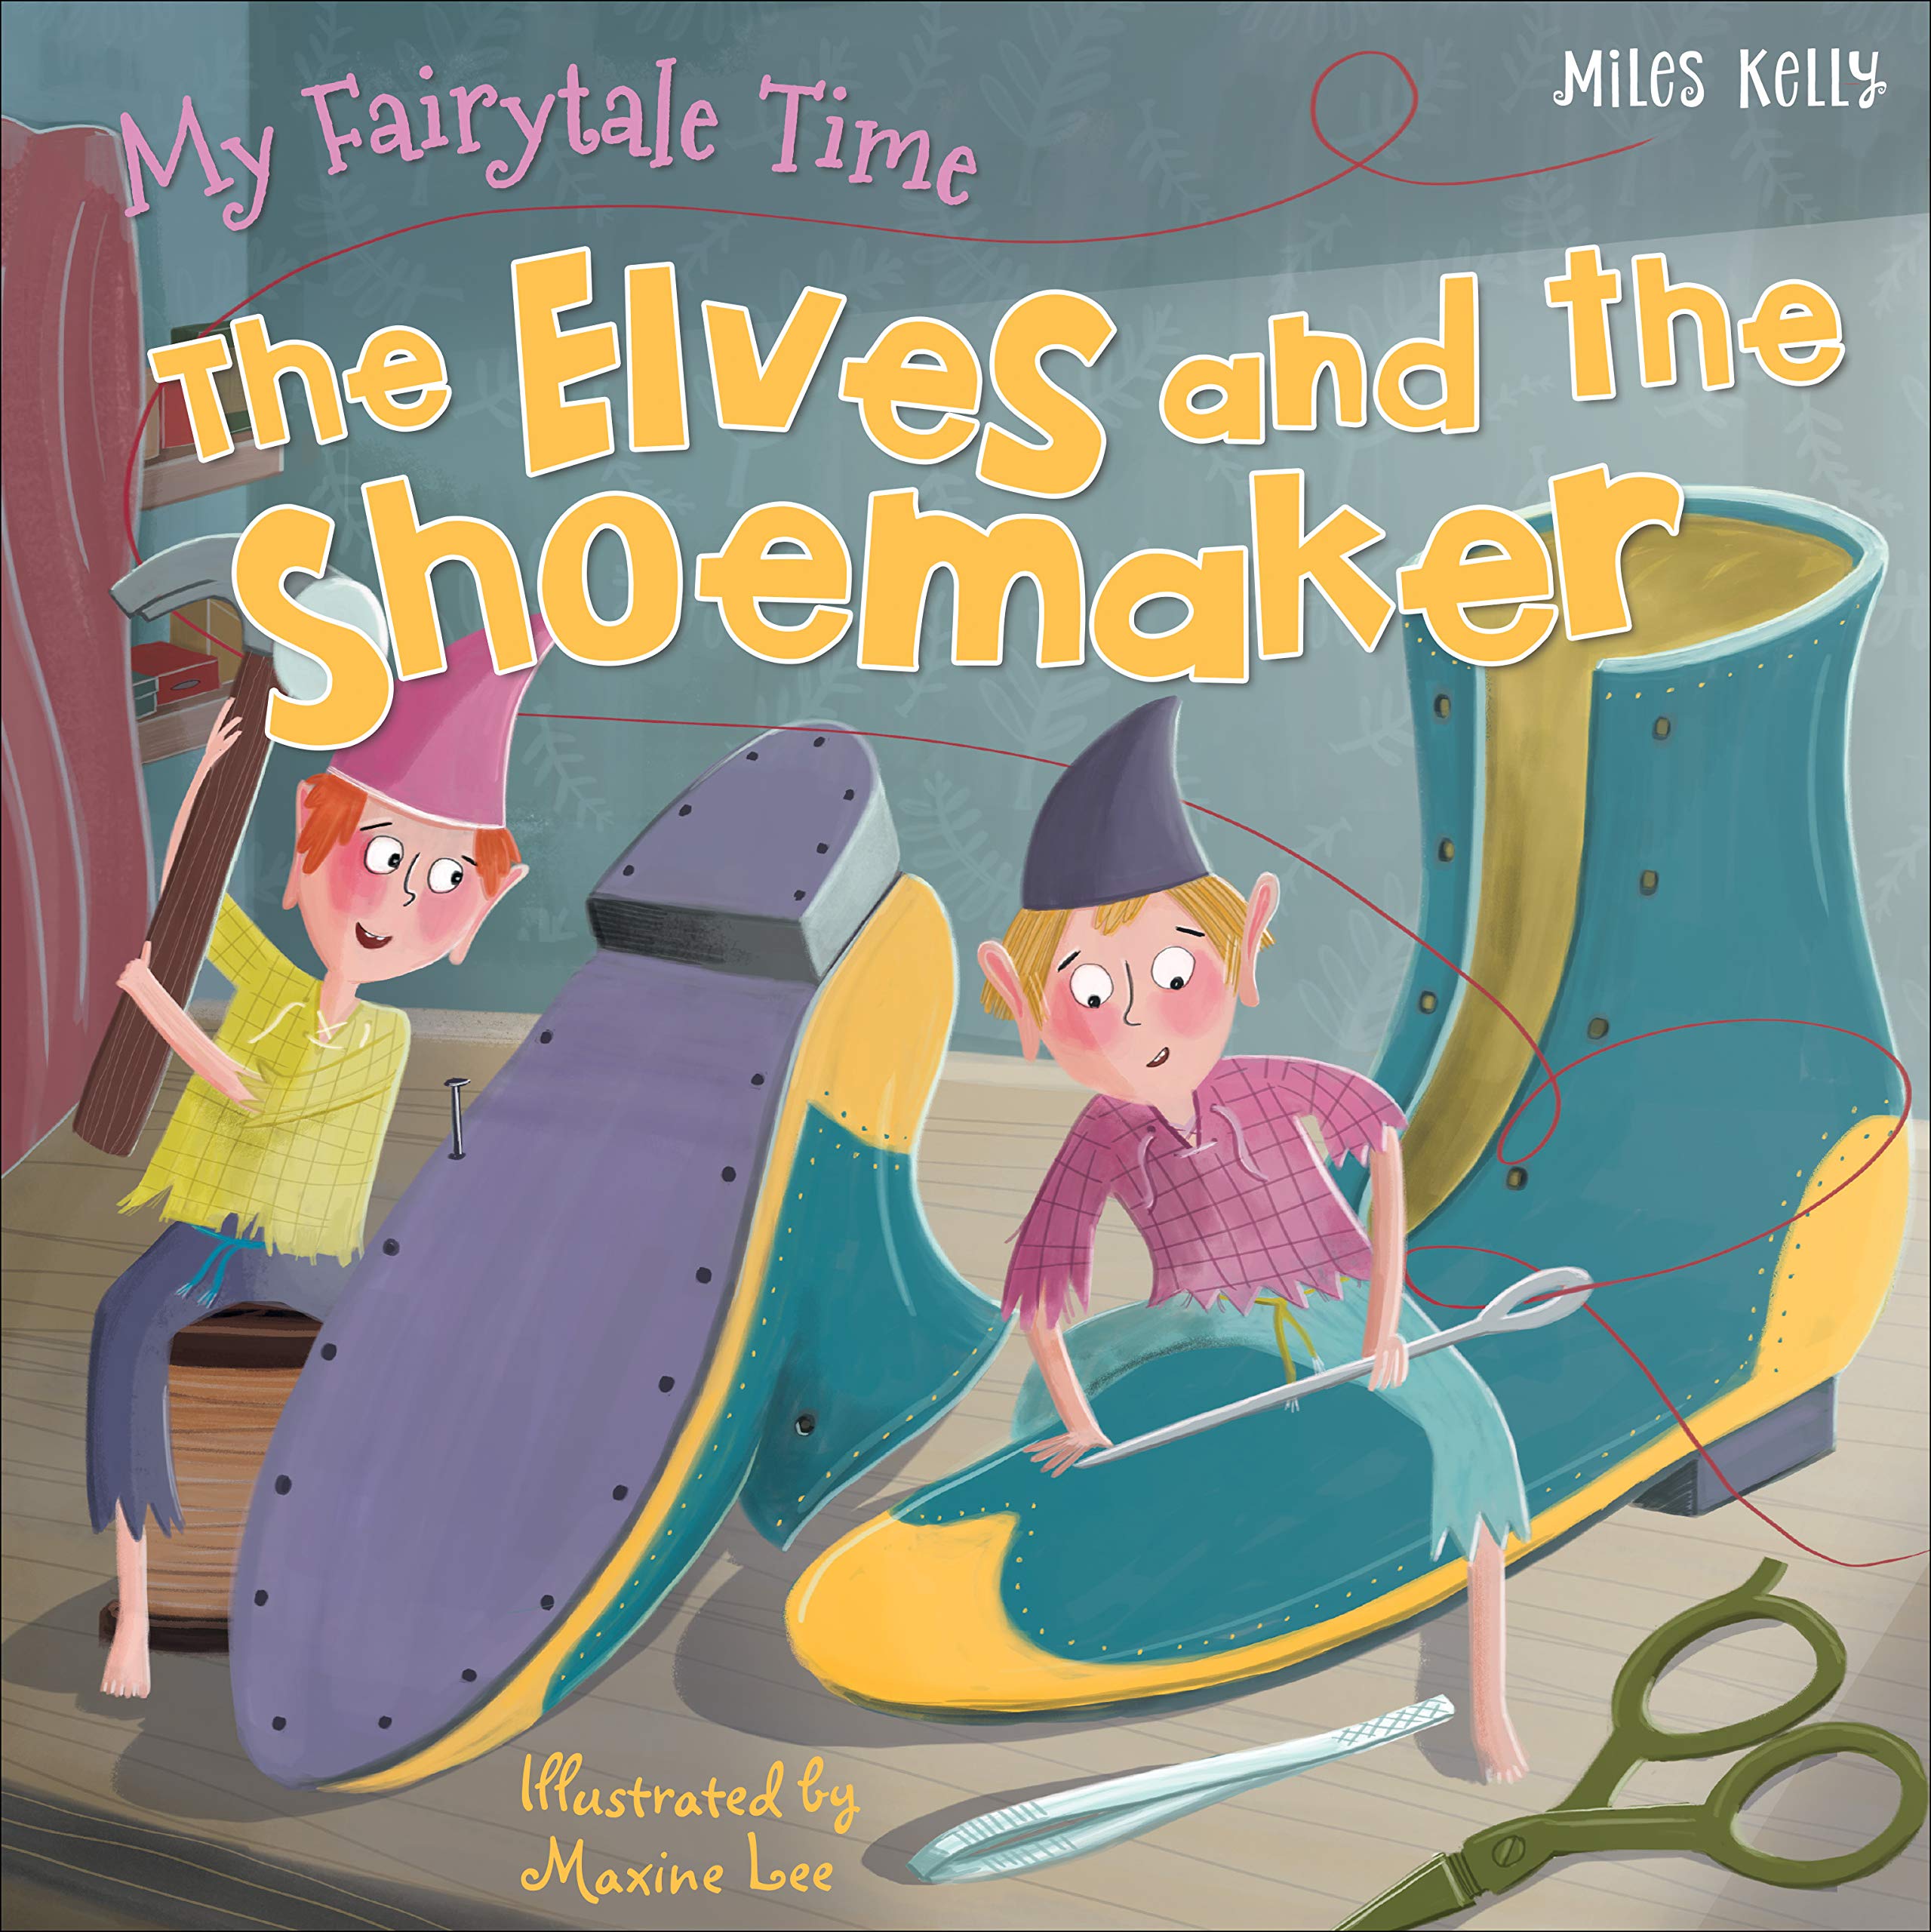 The Elves and the Shoemaker (My Fairytale Time)